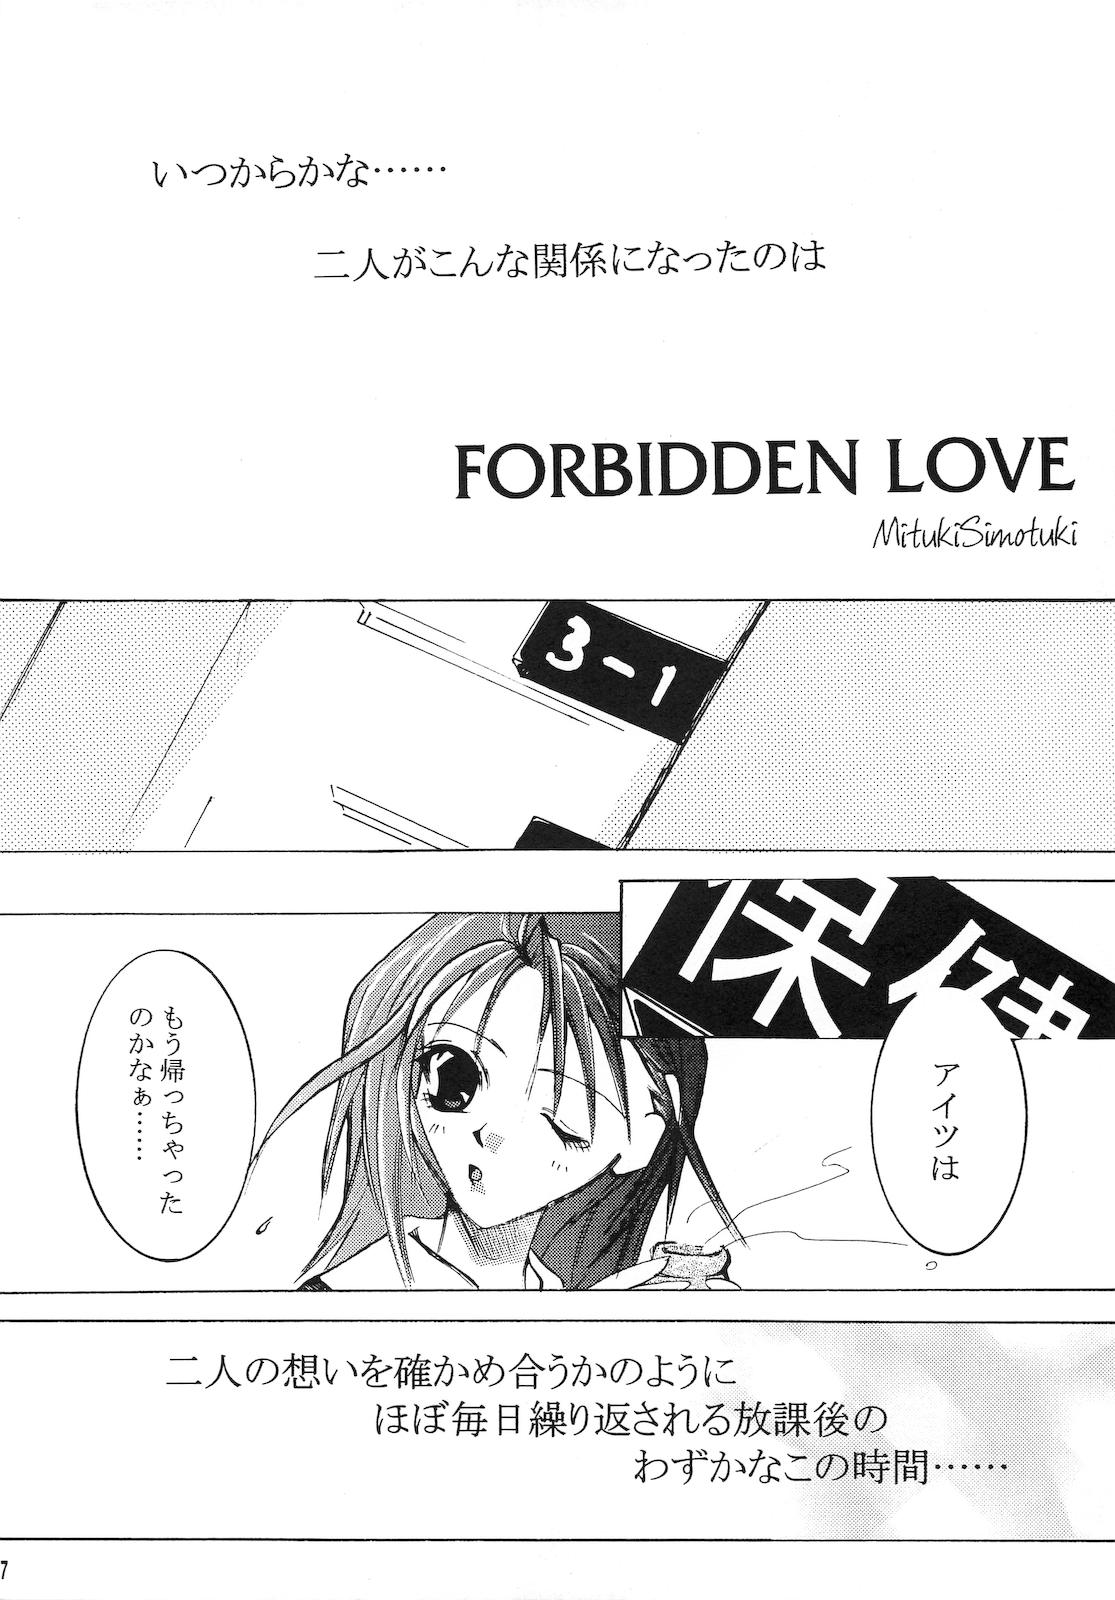 Family Forbidden Love - With you Celeb - Page 6